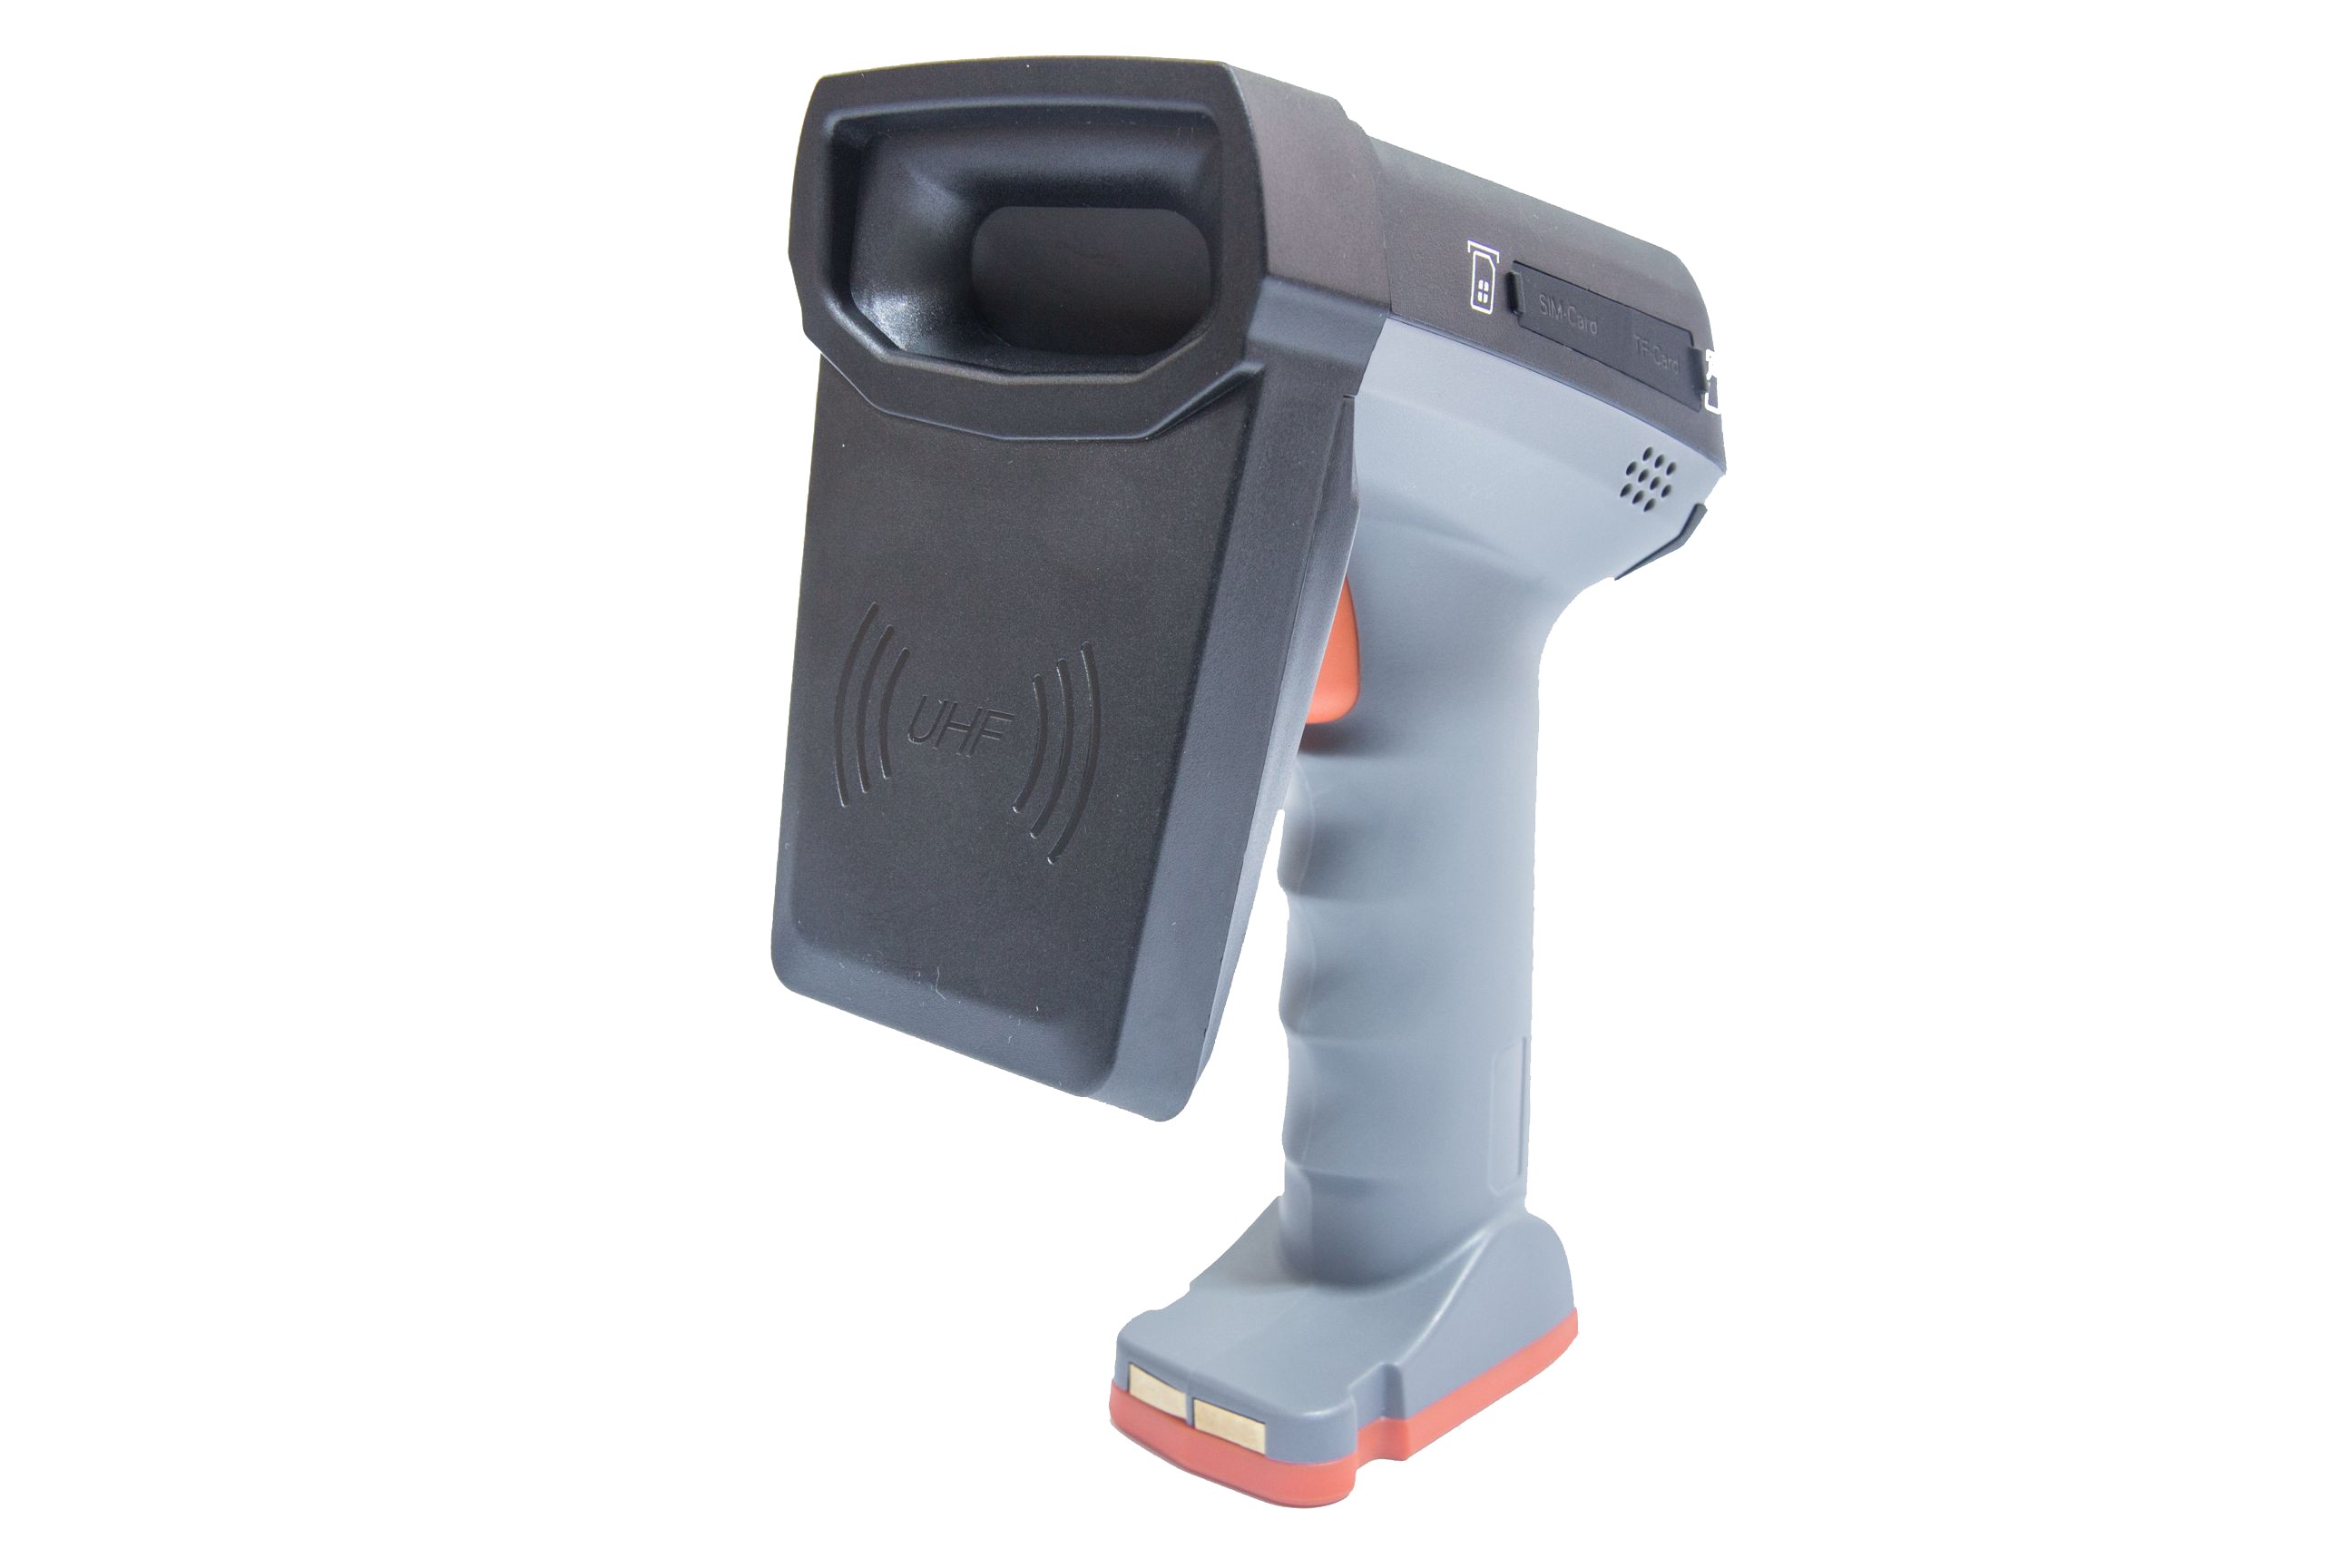 UHF Handheld RFID Reader 865-868Mhz,902-925Mhz SR2000 FOR Vehicle Access Control Management, Personnel Access Control Management